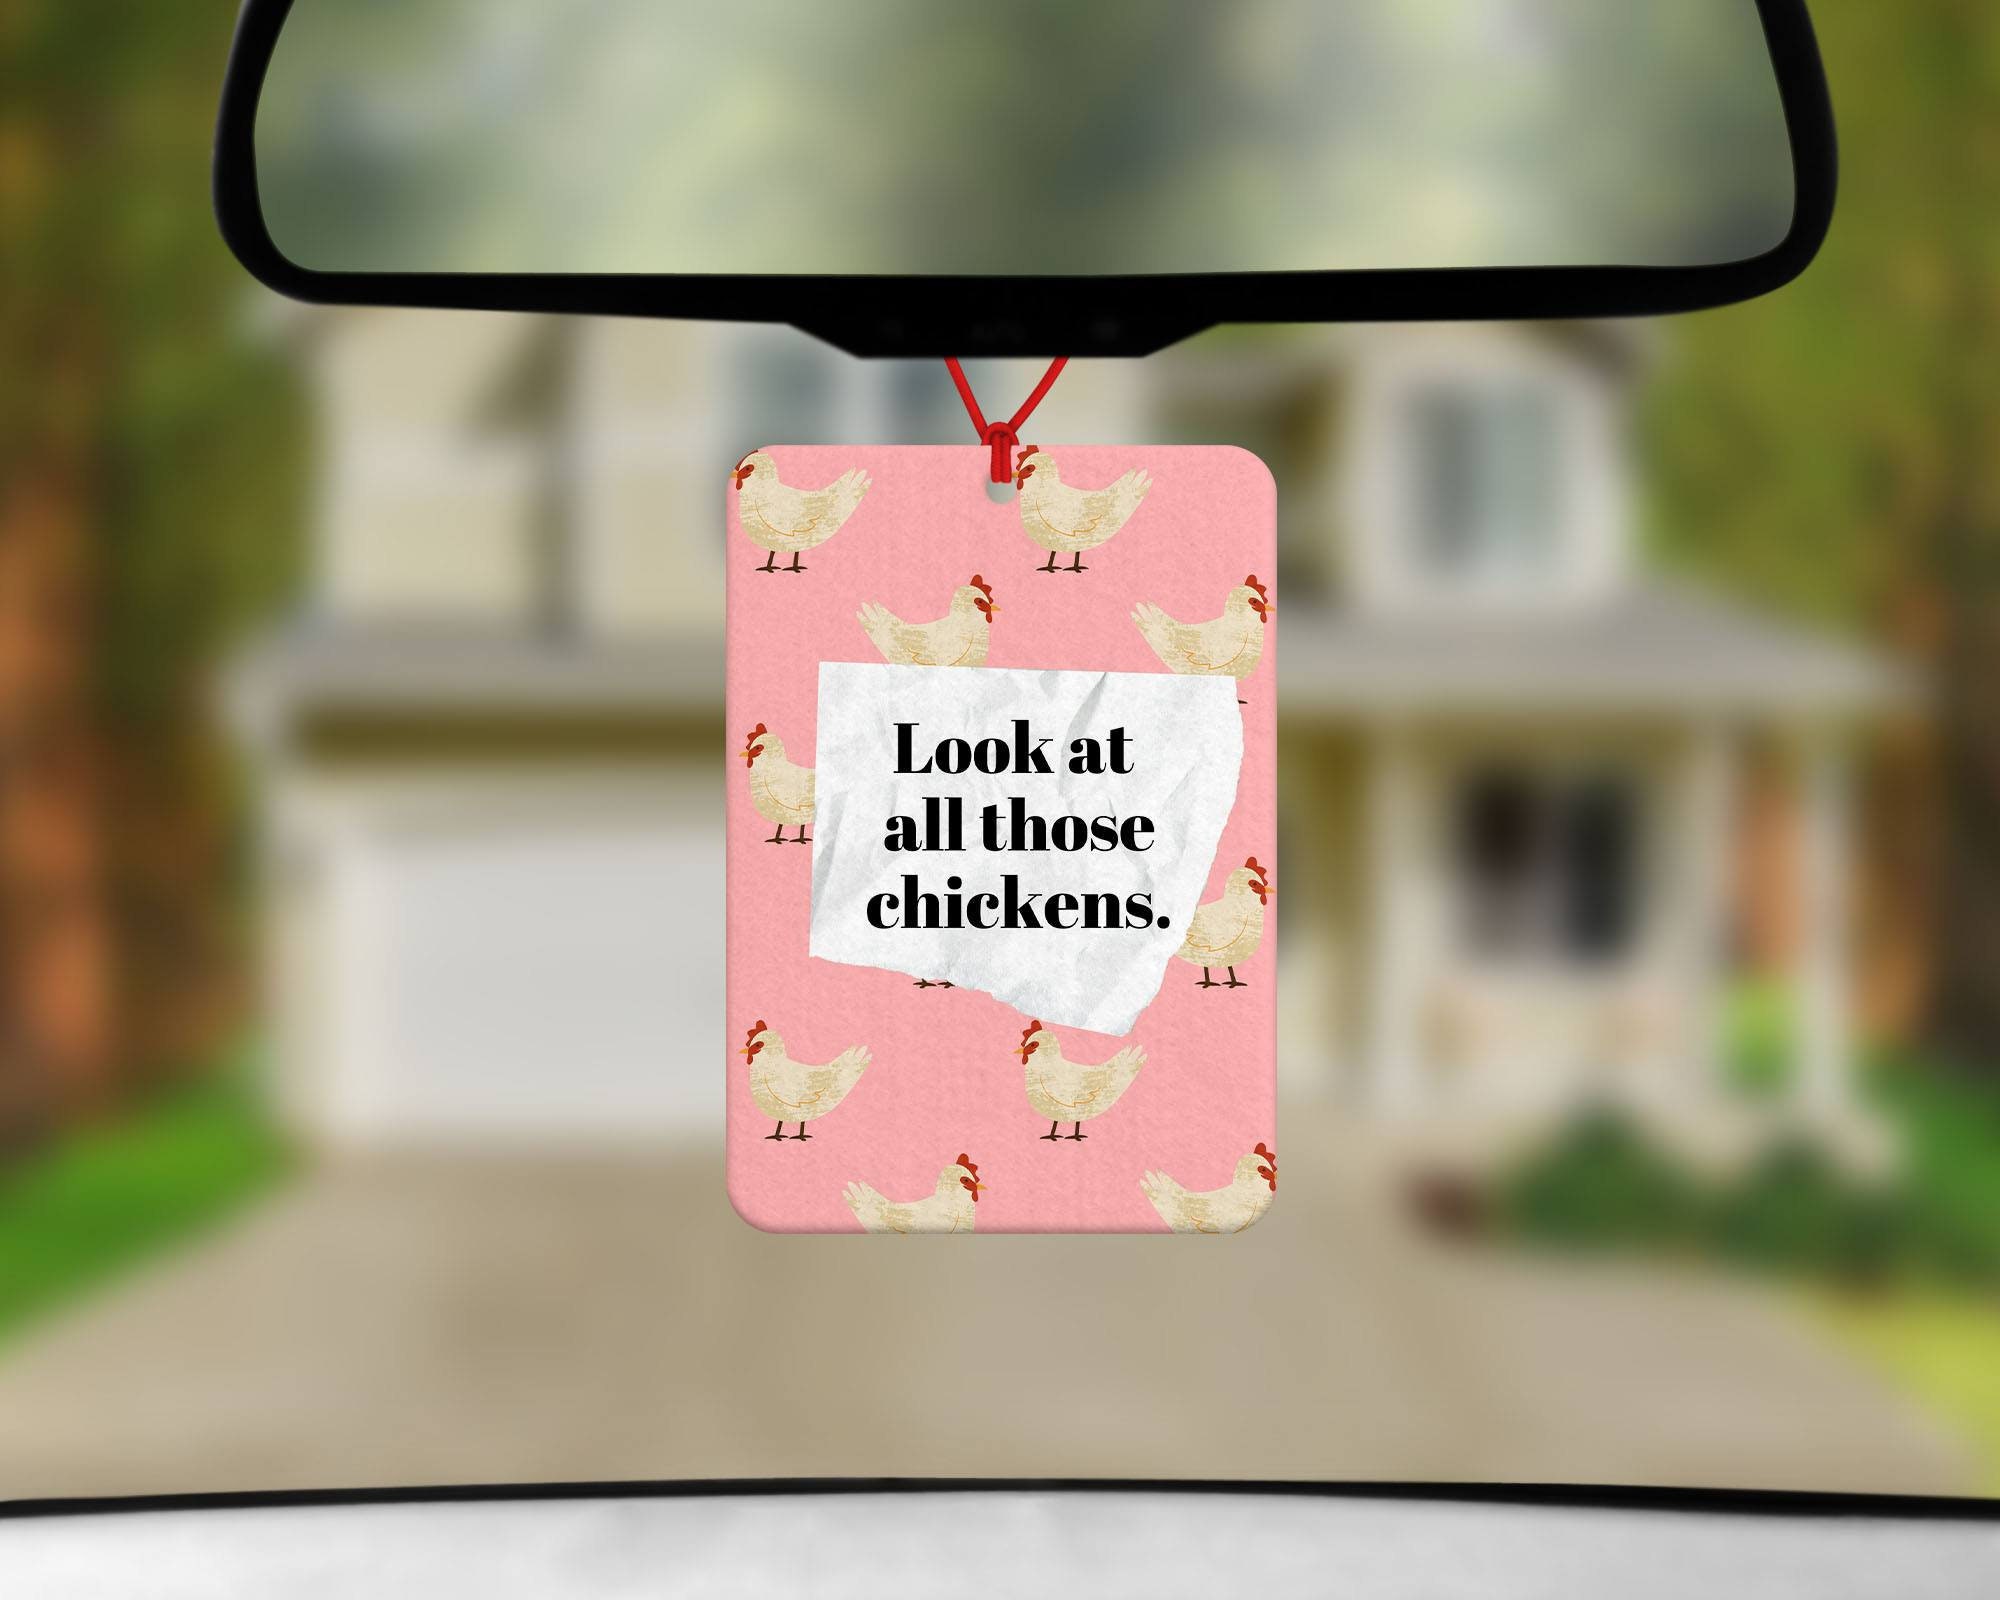 Chickens Meme Car Air Freshener Look at All Those Chickens Fun Car Air  Freshener Car Accessories New Driver Gift Funny Meme Gifts 